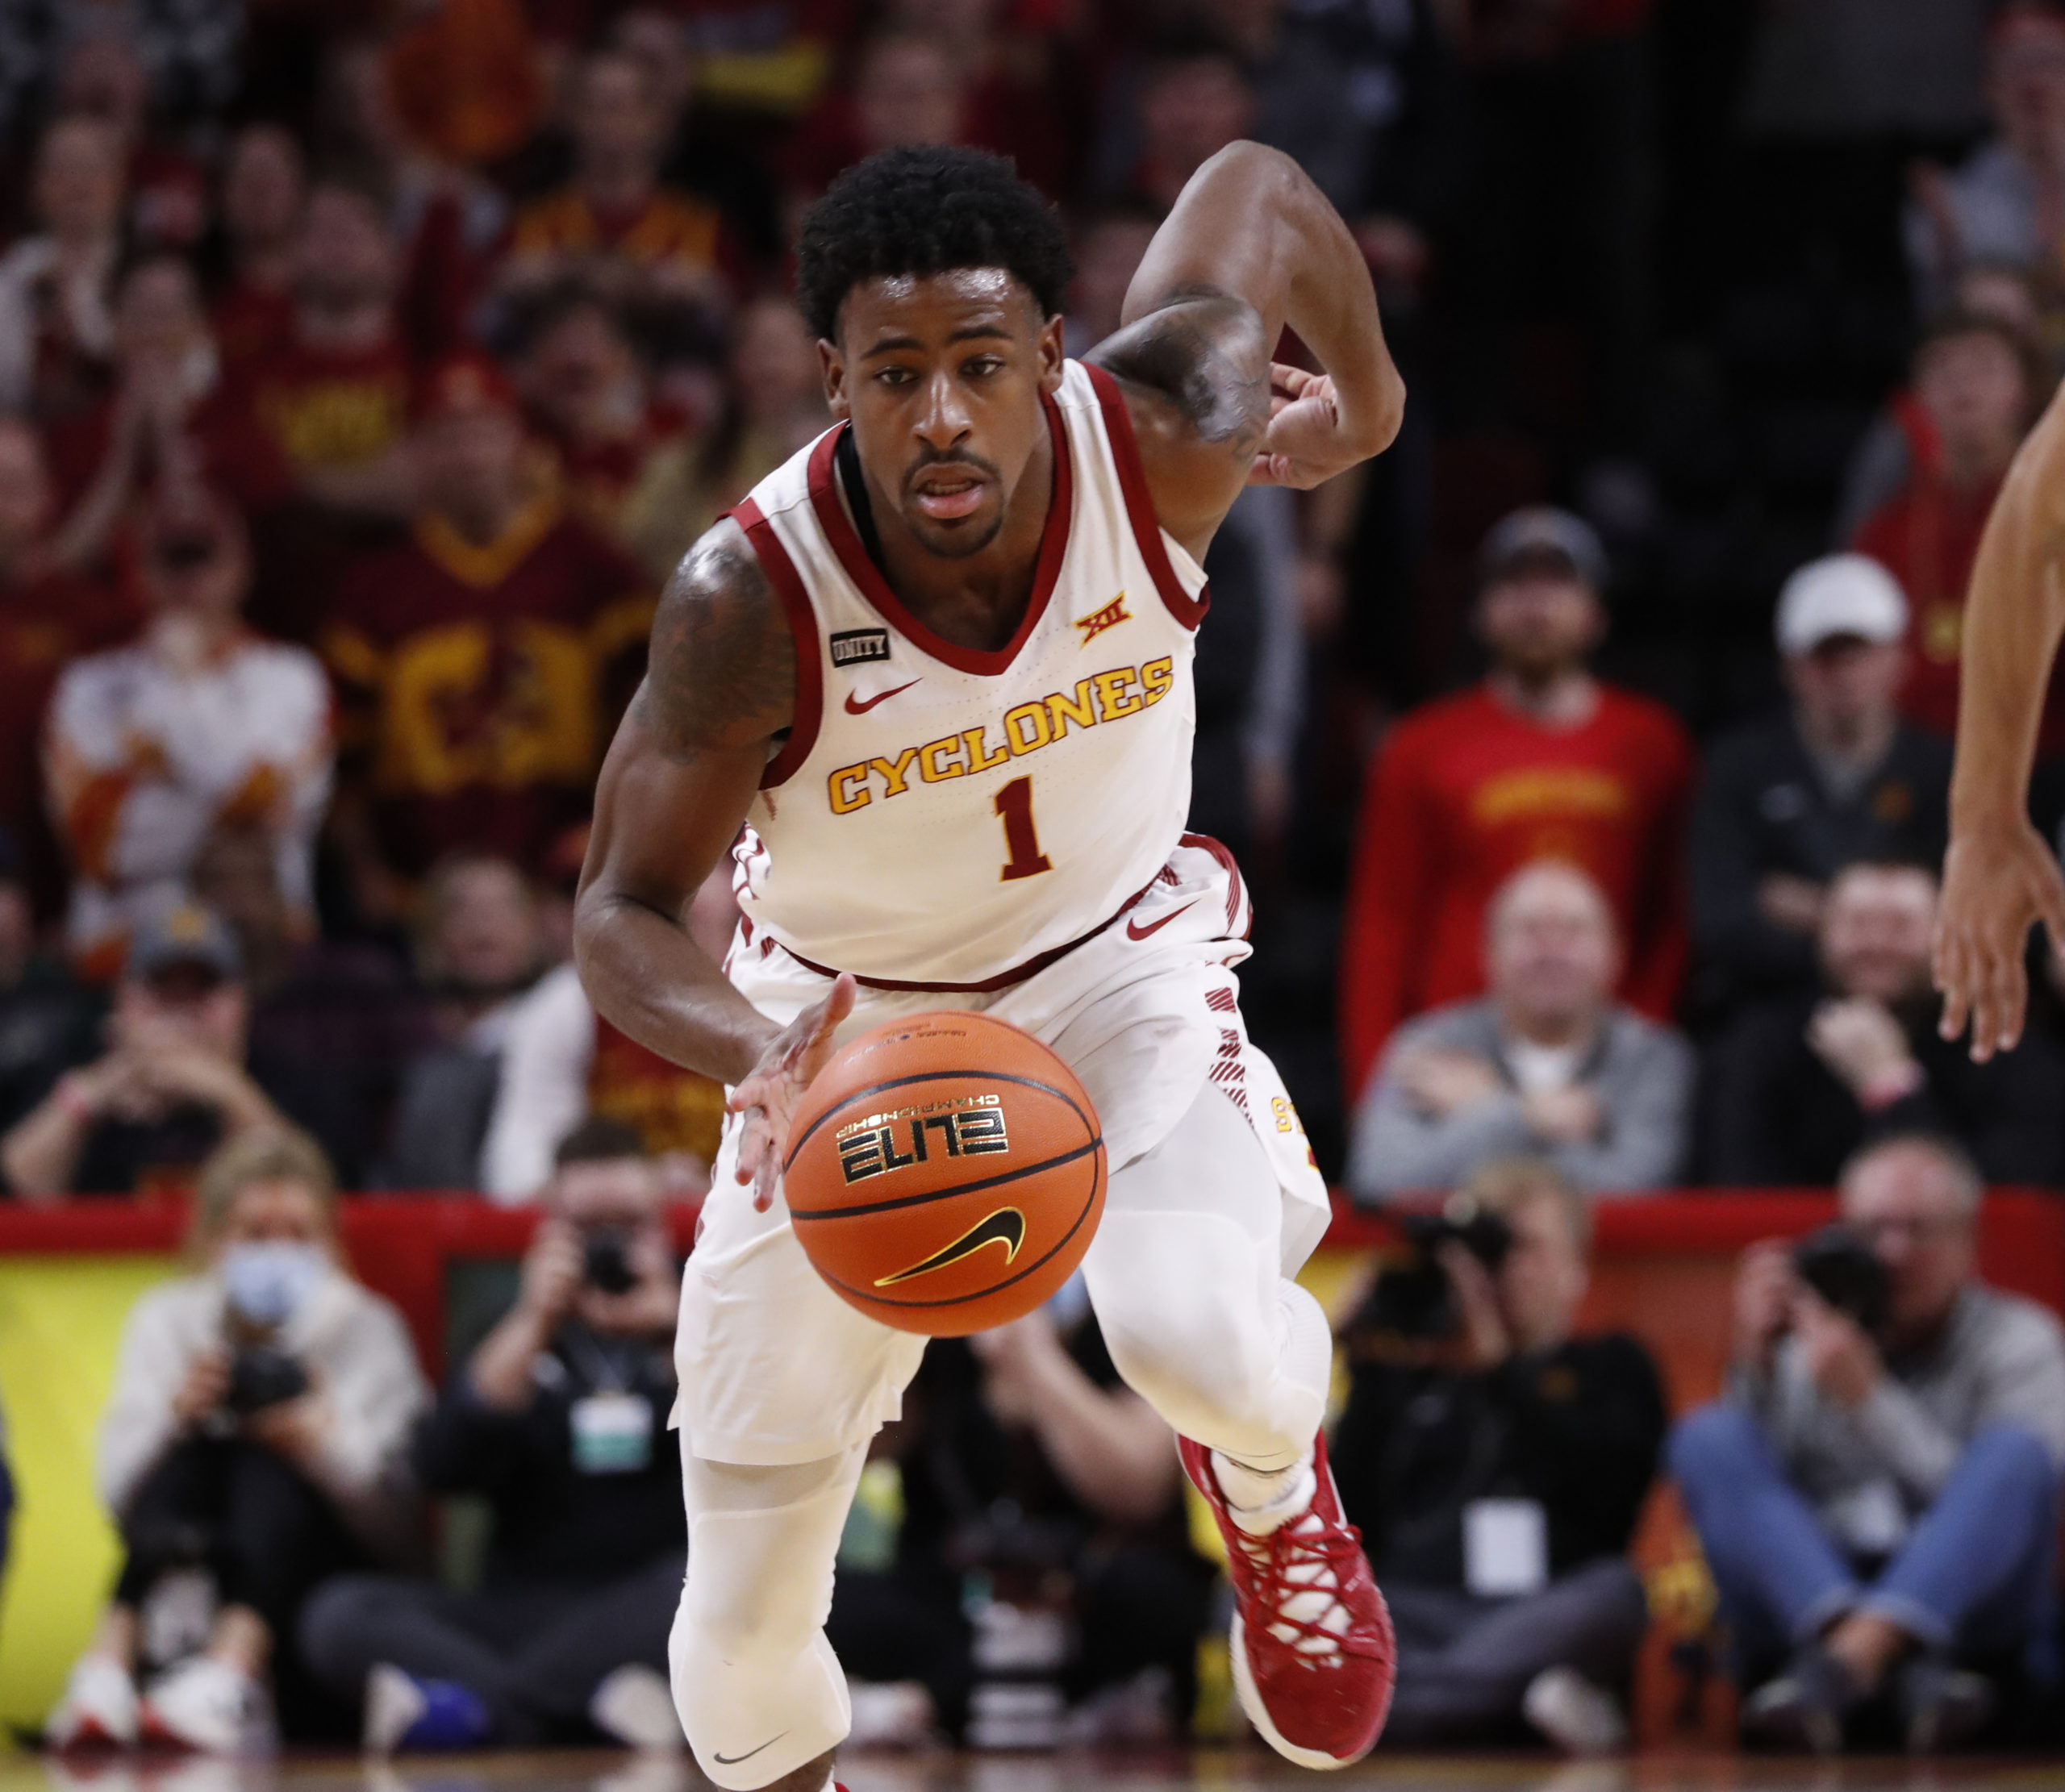 AMES, IA - FEBRUARY 1: Izaiah Brockington #1 of the Iowa State Cyclones drives the ball in the first half of play at Hilton Coliseum on February 1, 2022 in Ames, Iowa. The Kansas Jayhawks won 70-61 over the Iowa State Cyclones. (Photo by David K Purdy/Getty Images)